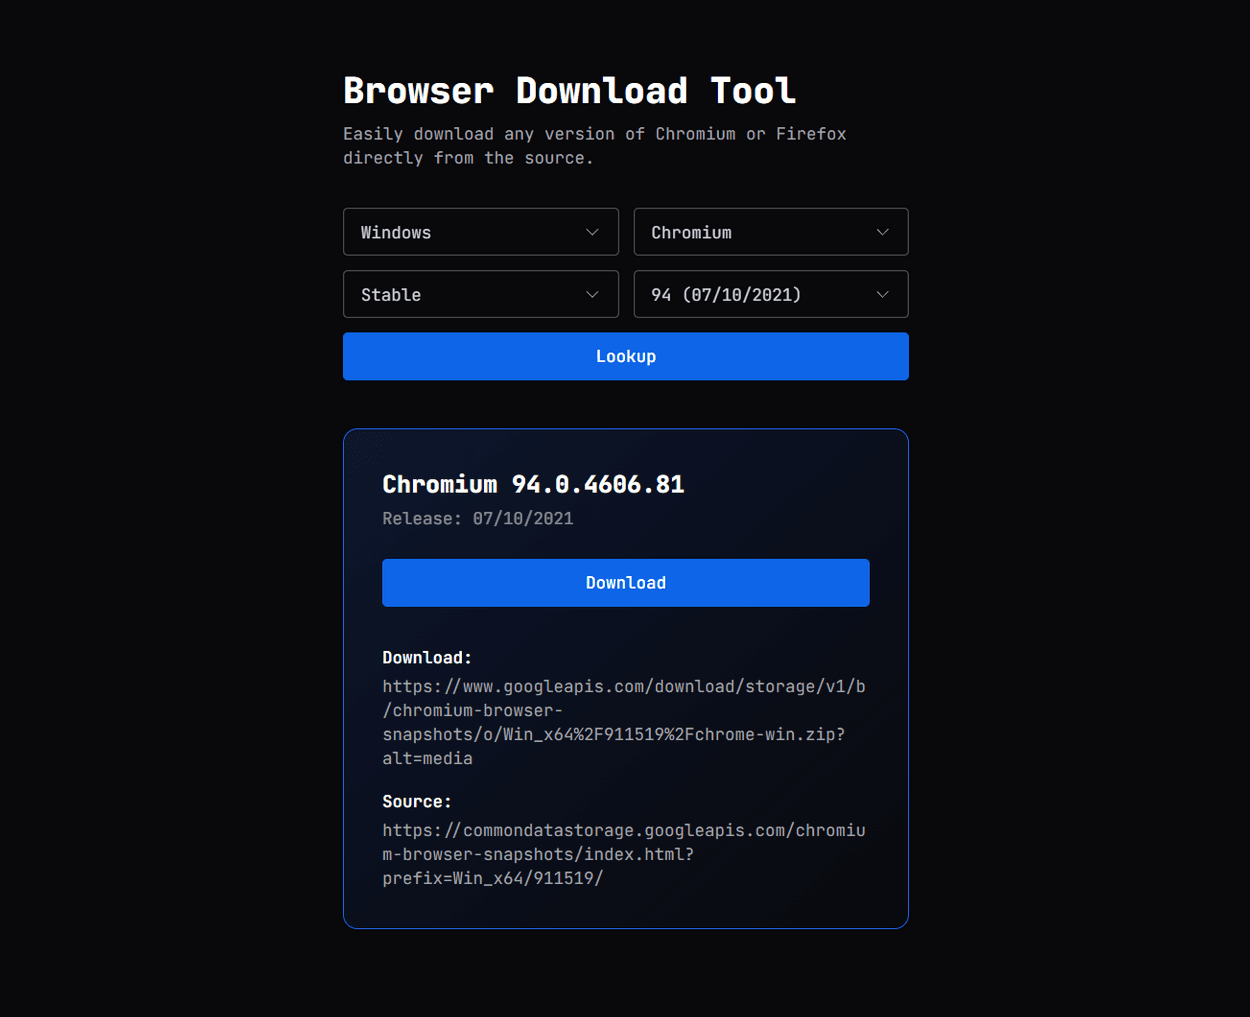 Screenshot/Mock-up of the project: Browser Download Tool